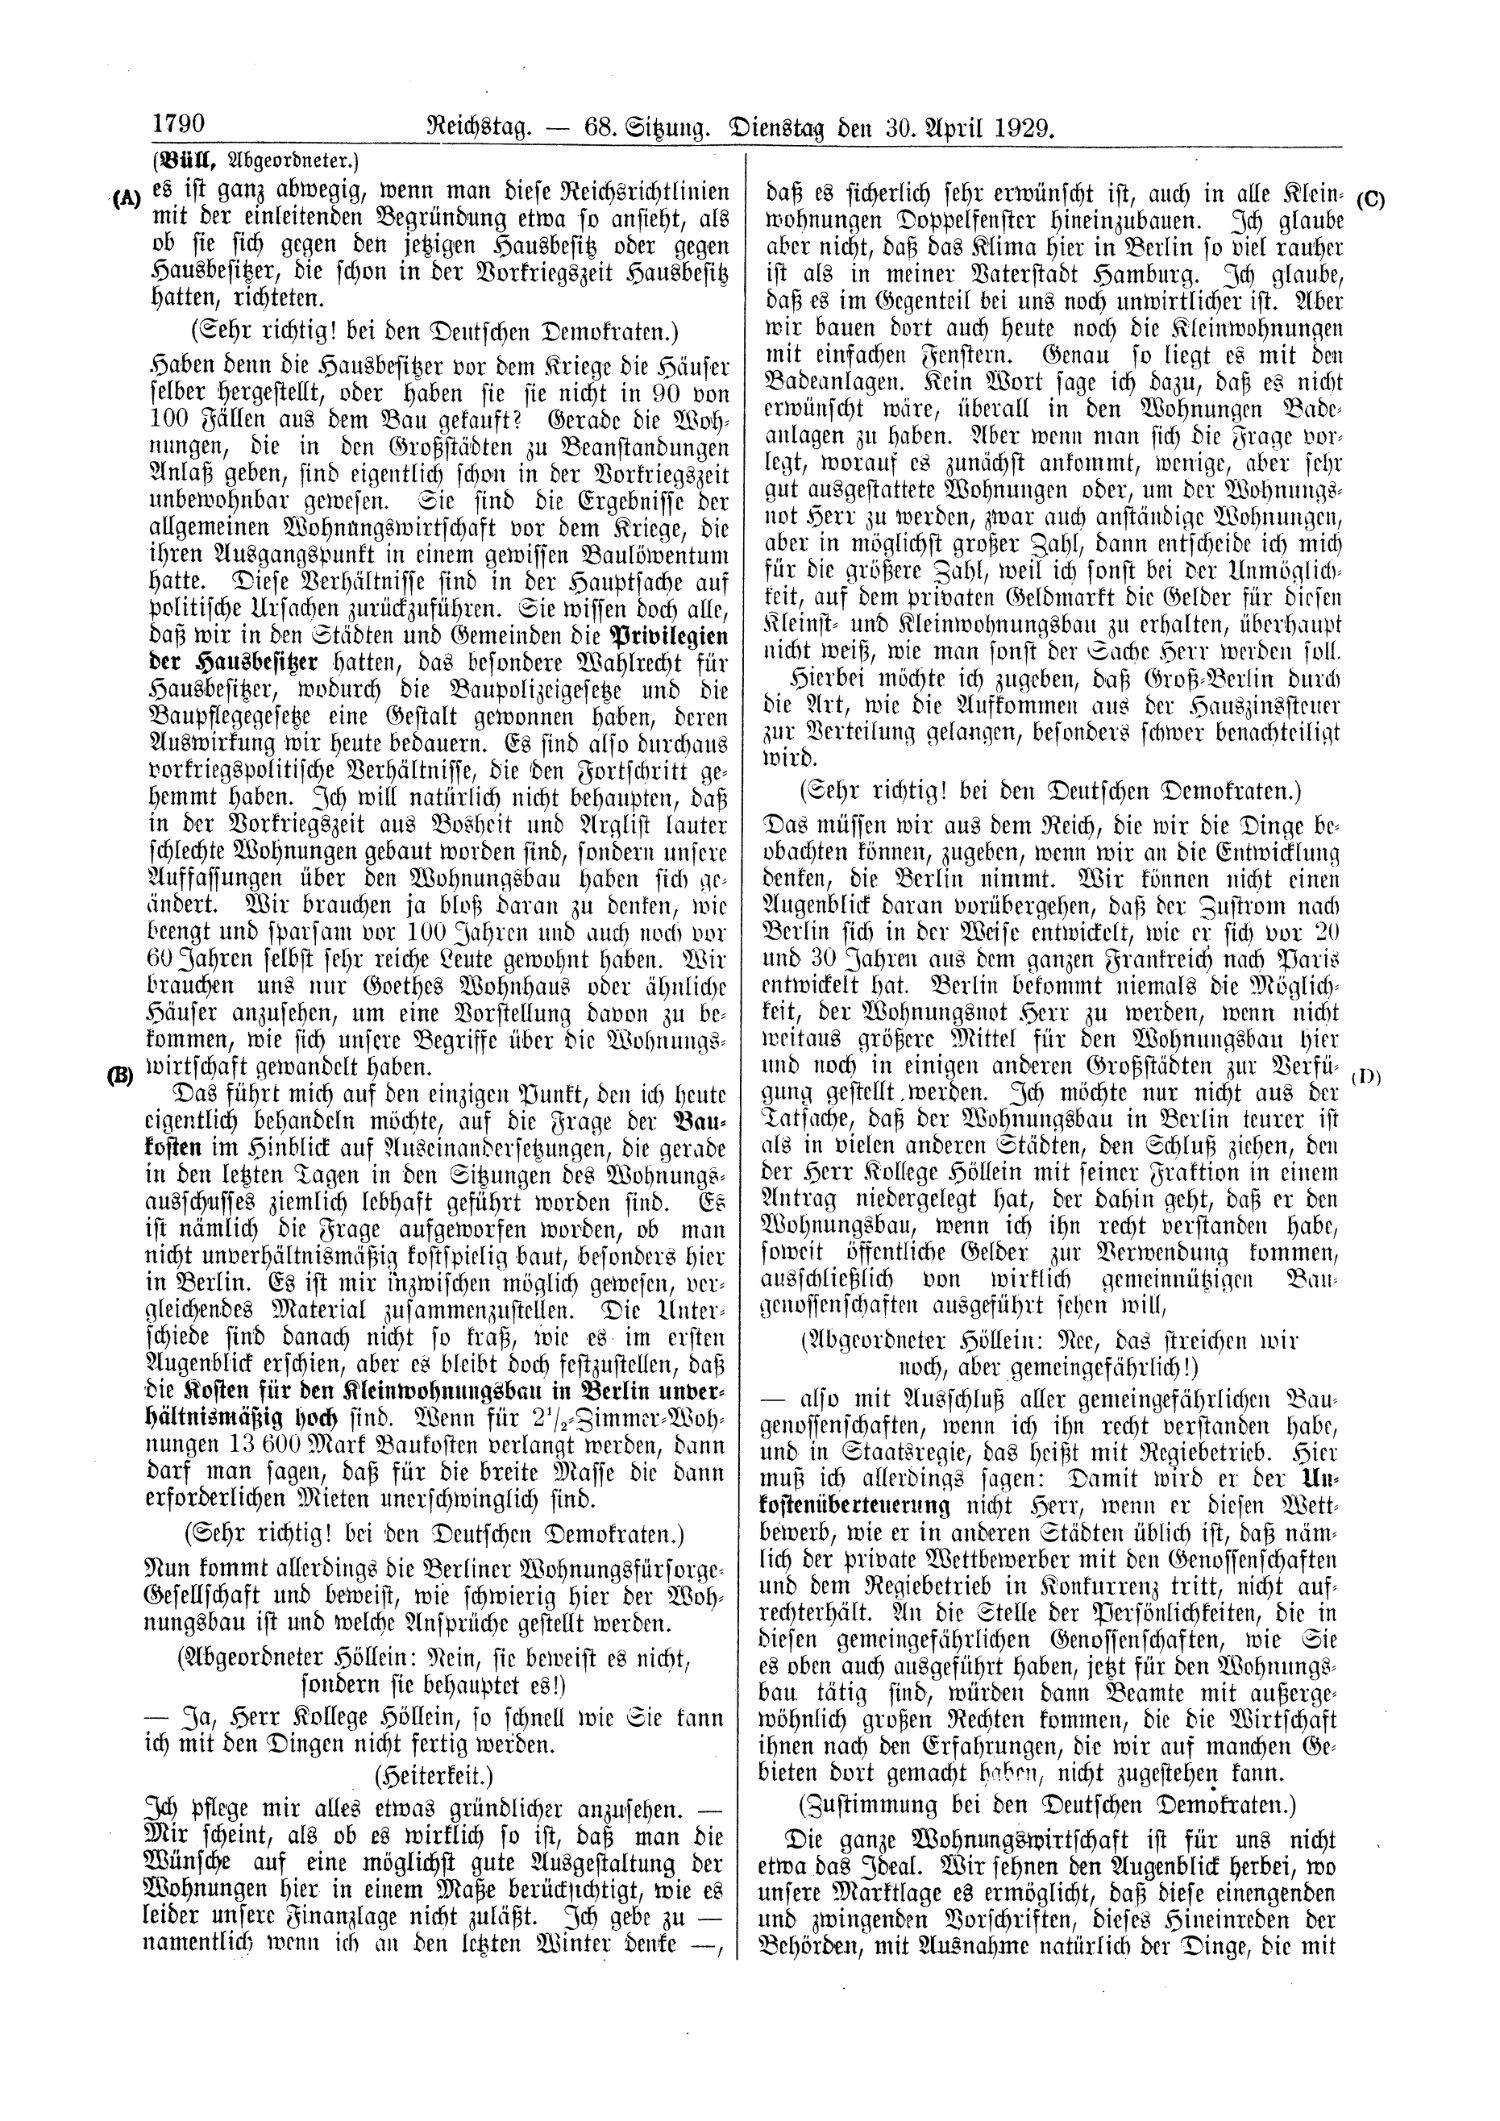 Scan of page 1790